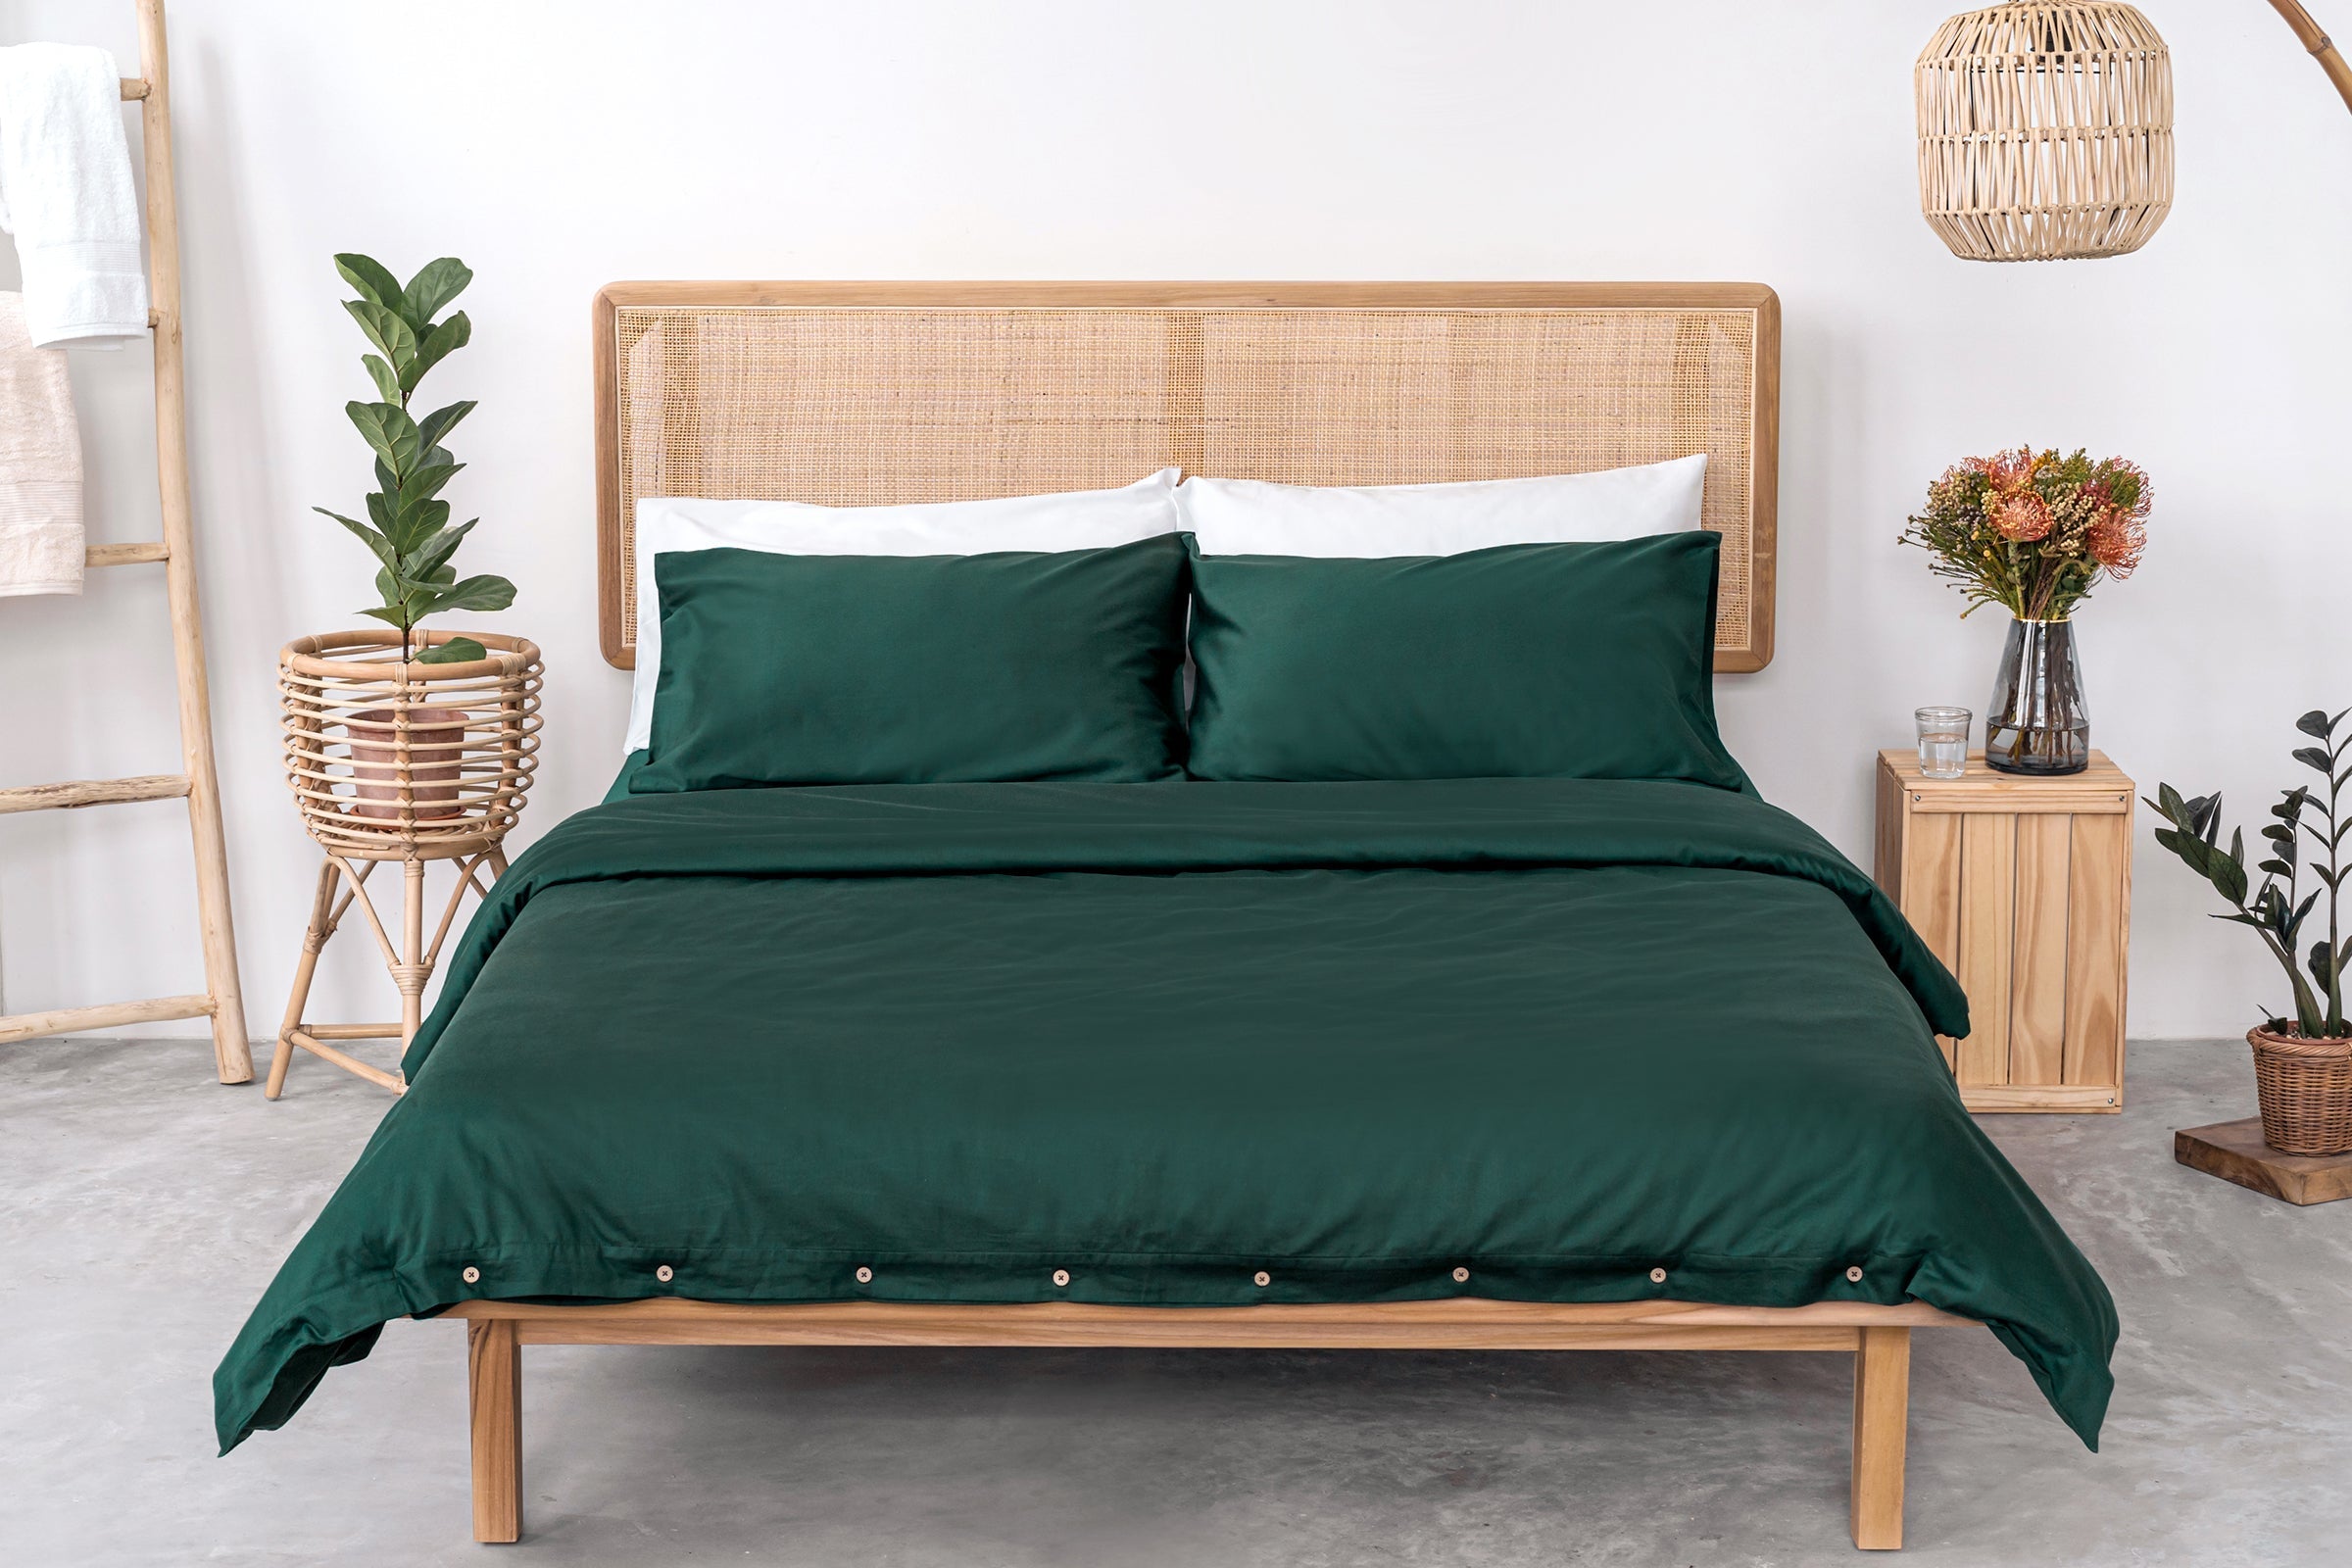 classic-forest-duvet-set-wide-shot-by-sojao.jpg